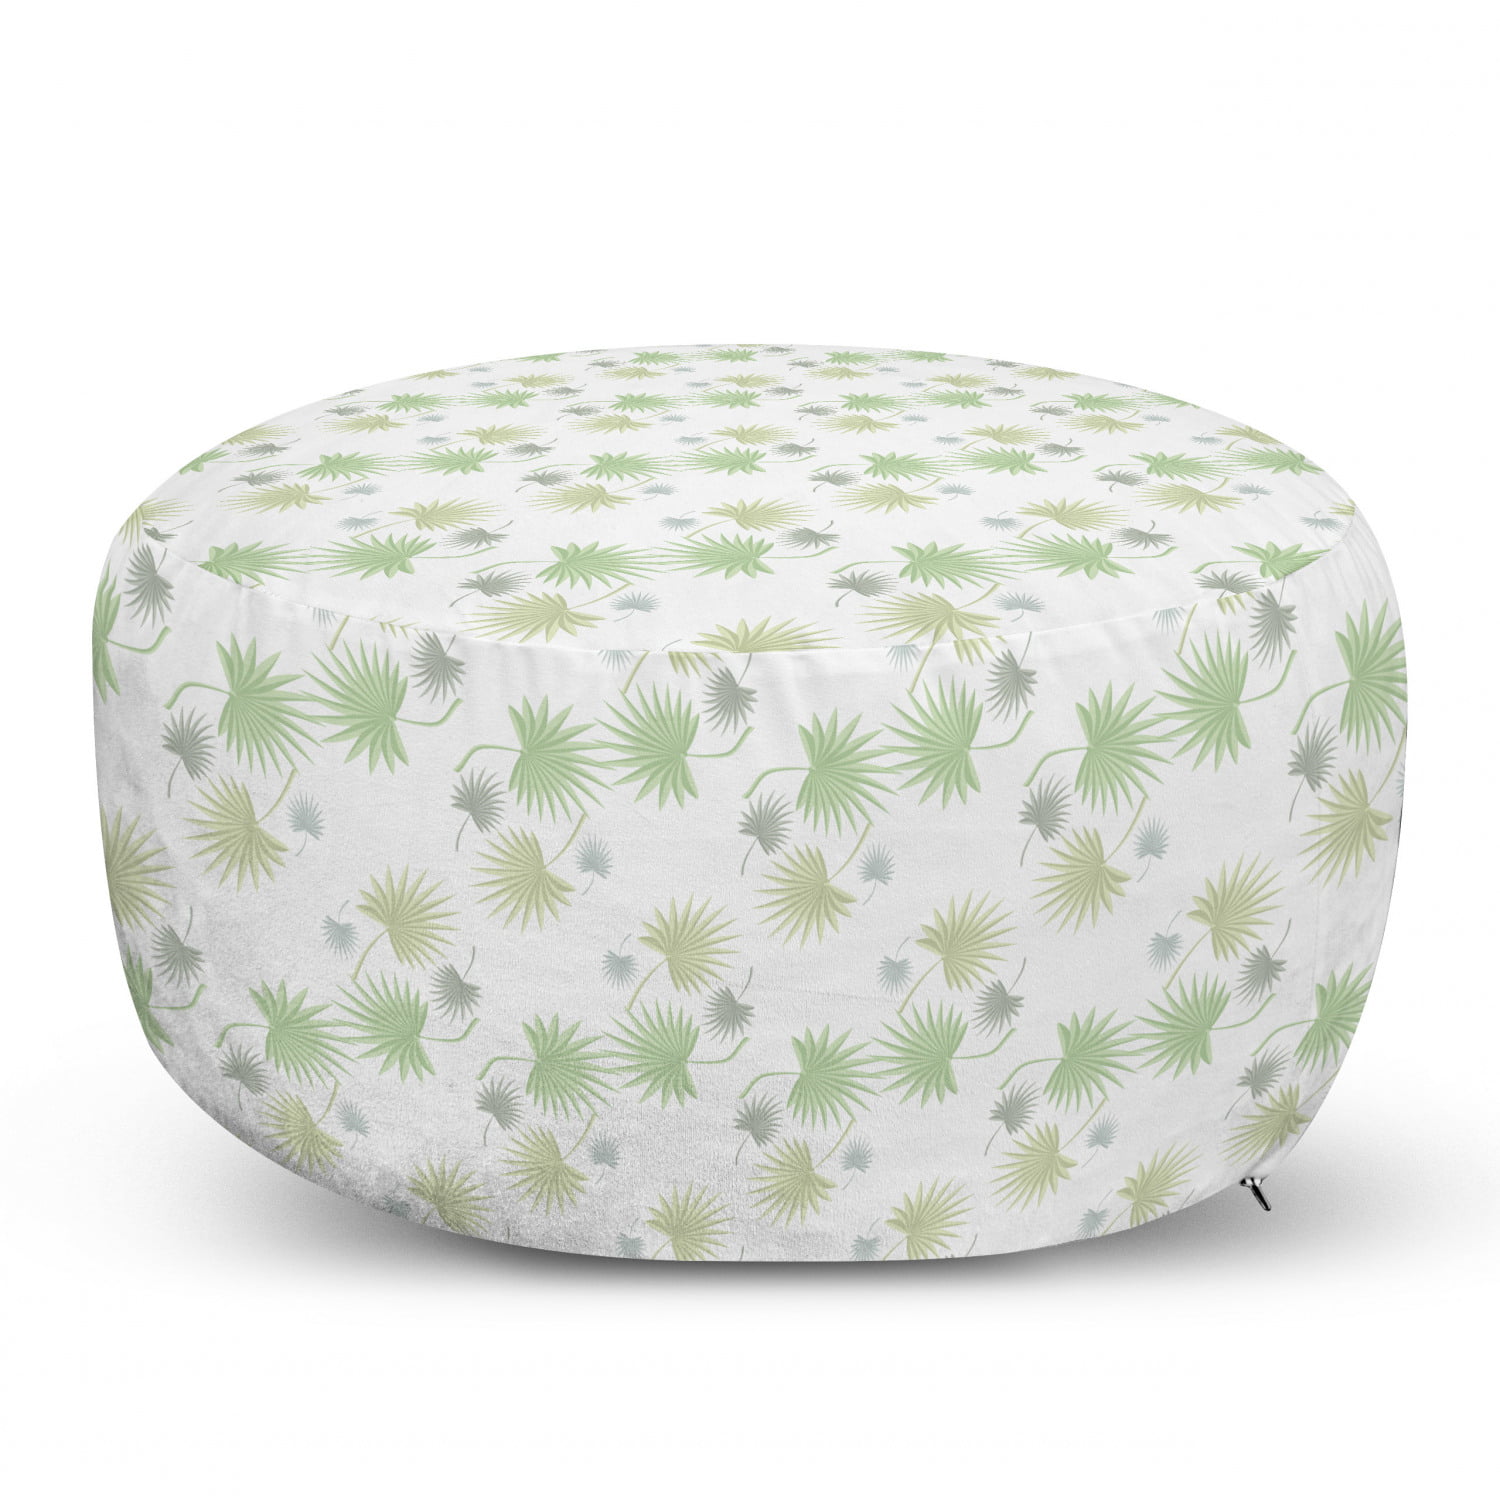 Fern Green Burgundy and Pink 25 Gardening Leaves and Blossoms Yard Childish Flora Season Print Ambesonne Botanical Rectangle Pouf Under Desk Foot Stool for Living Room Office Ottoman with Cover